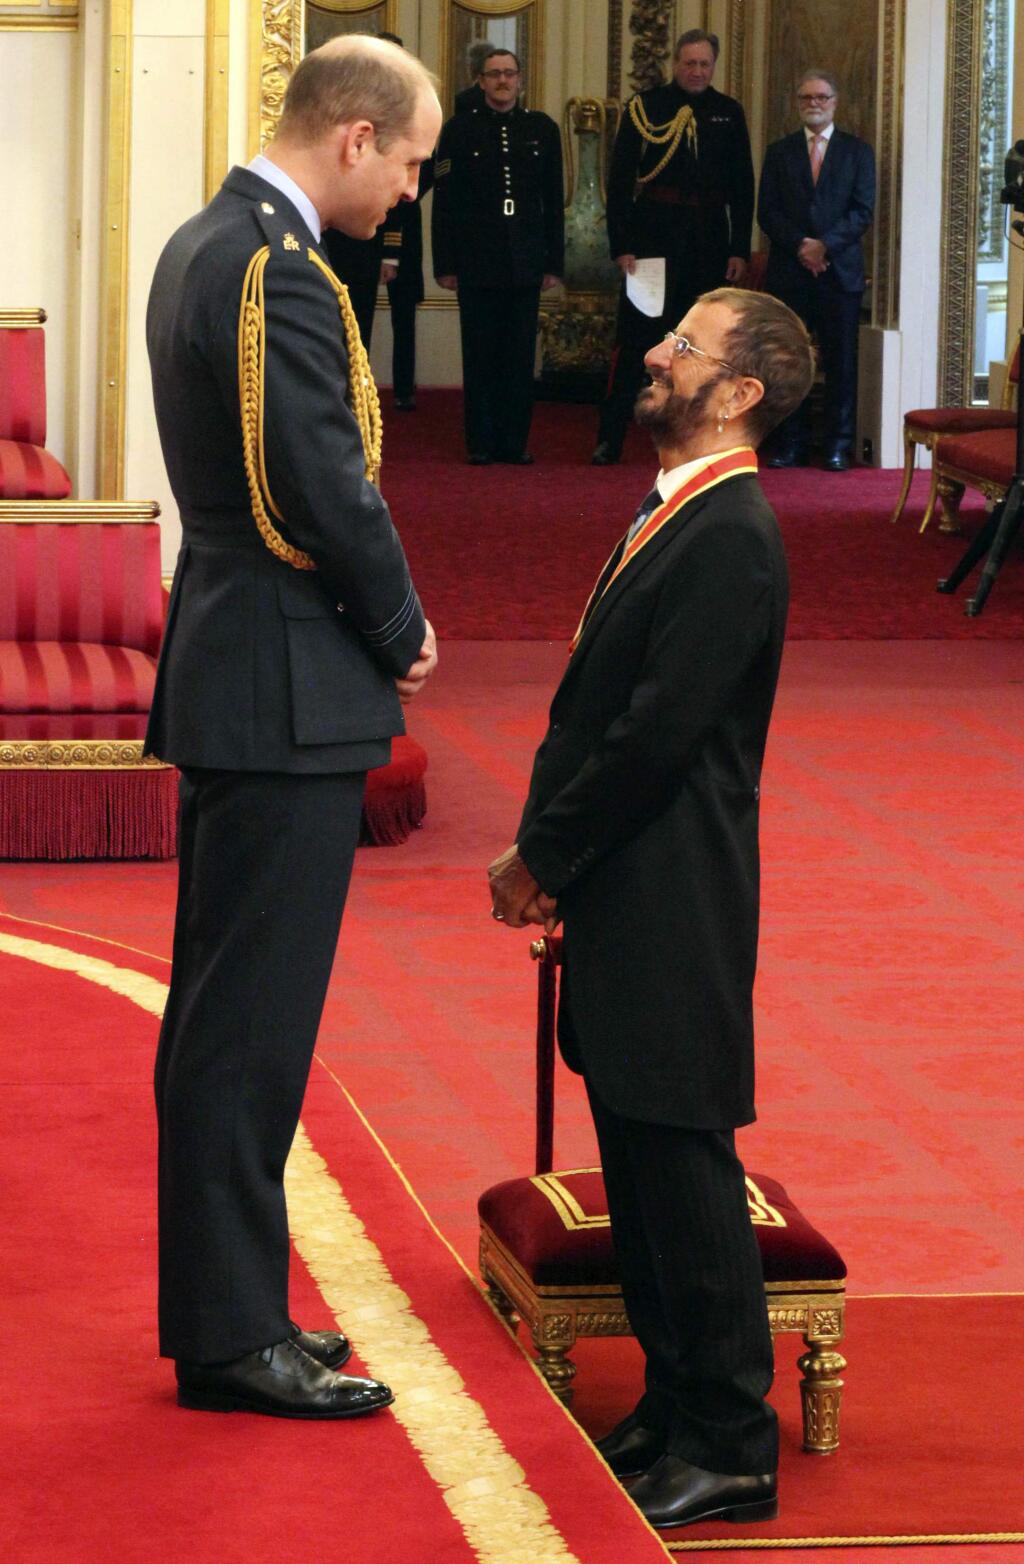 Former Beatle Ringo Starr, speaks with Britain's Prince William after receiving his knighthood at Buckingham Palace during an Investiture ceremony in London Tuesday March 20, 2018. (Yui Mok/PA via AP)